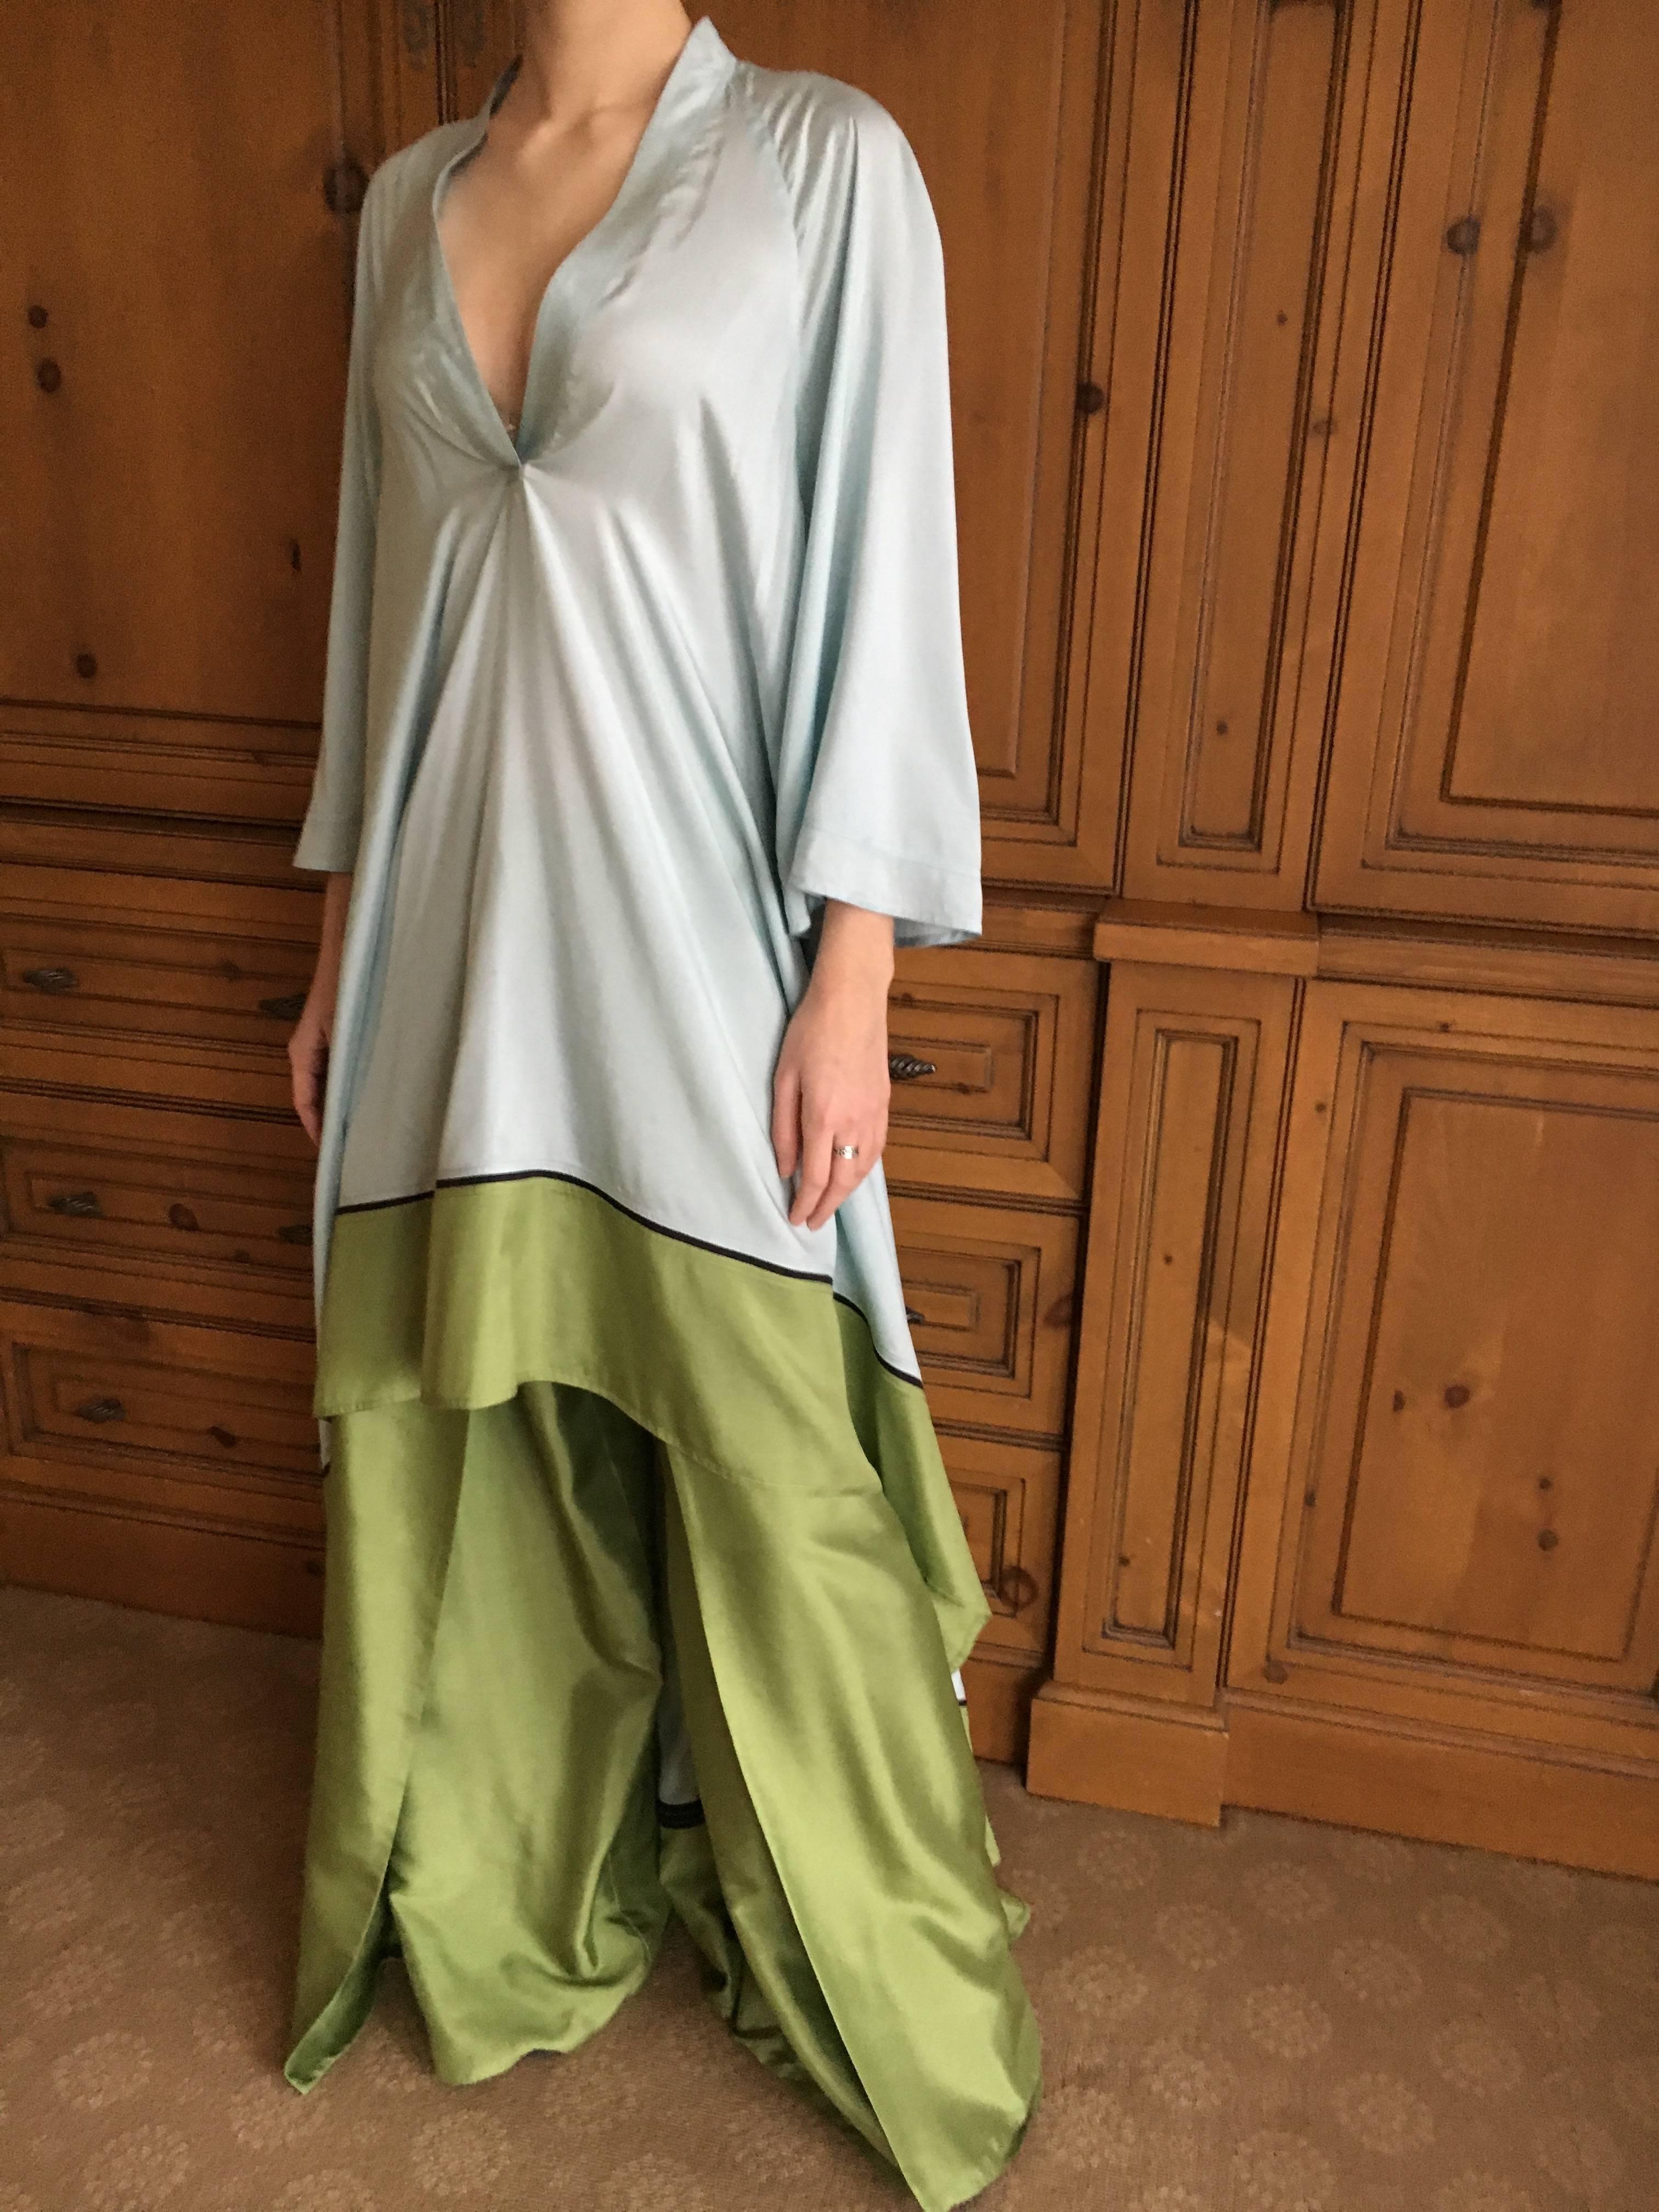 Chado Ralph Rucci Silk Turquoise & Green Caftan and Matching Wide Leg Pant For Sale 6